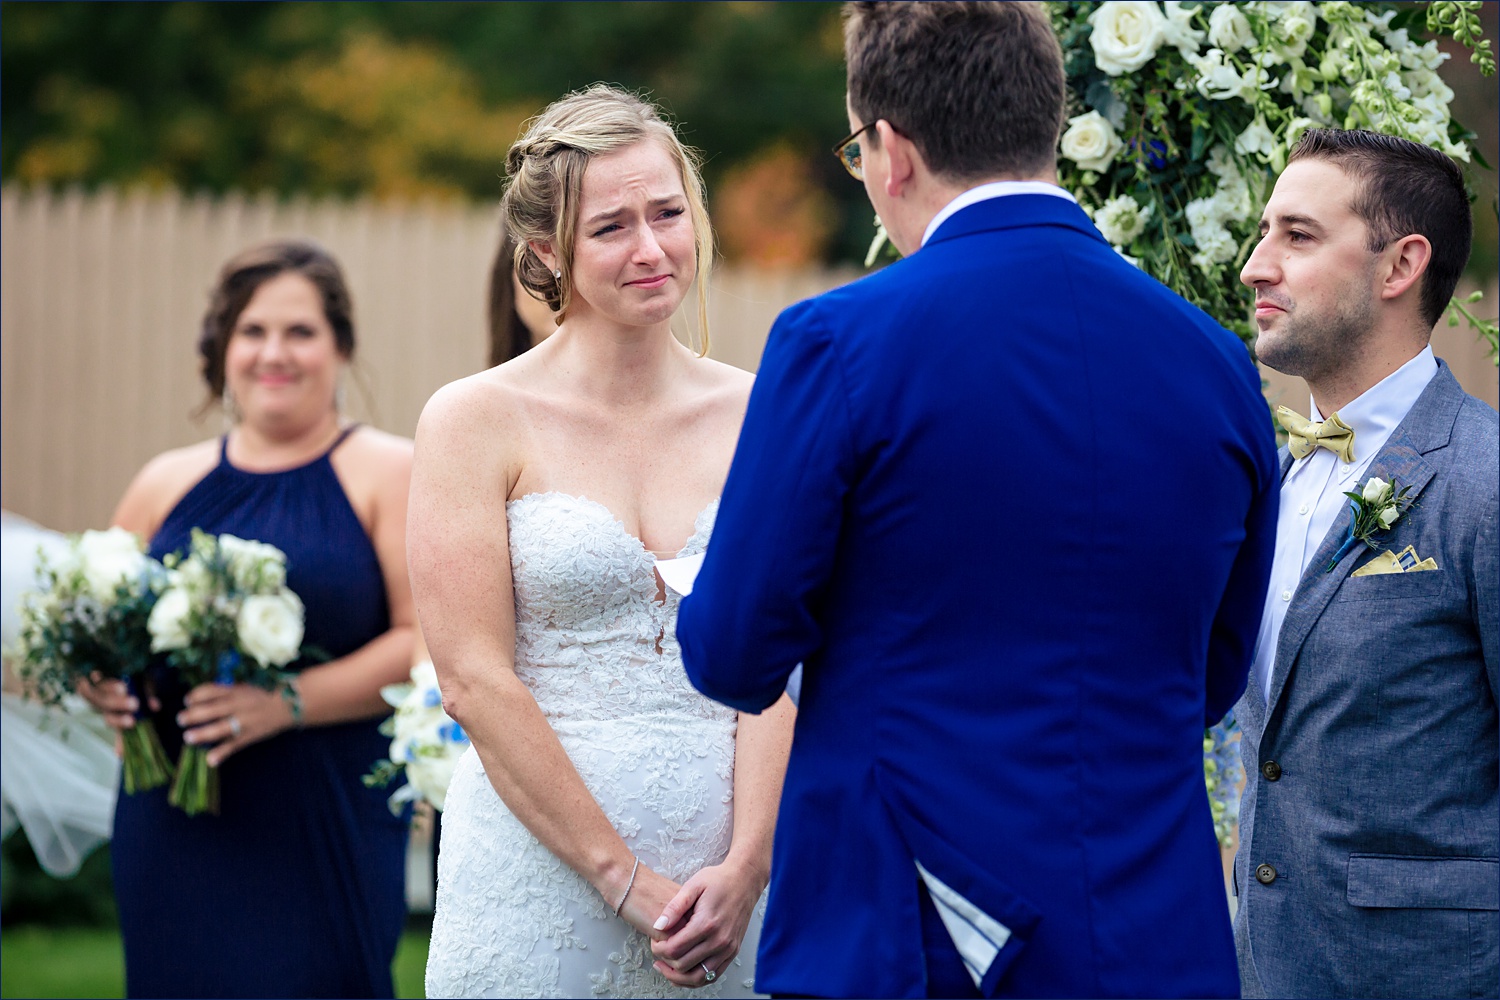 Tearful bride during the outdoor Maine wedding ceremony